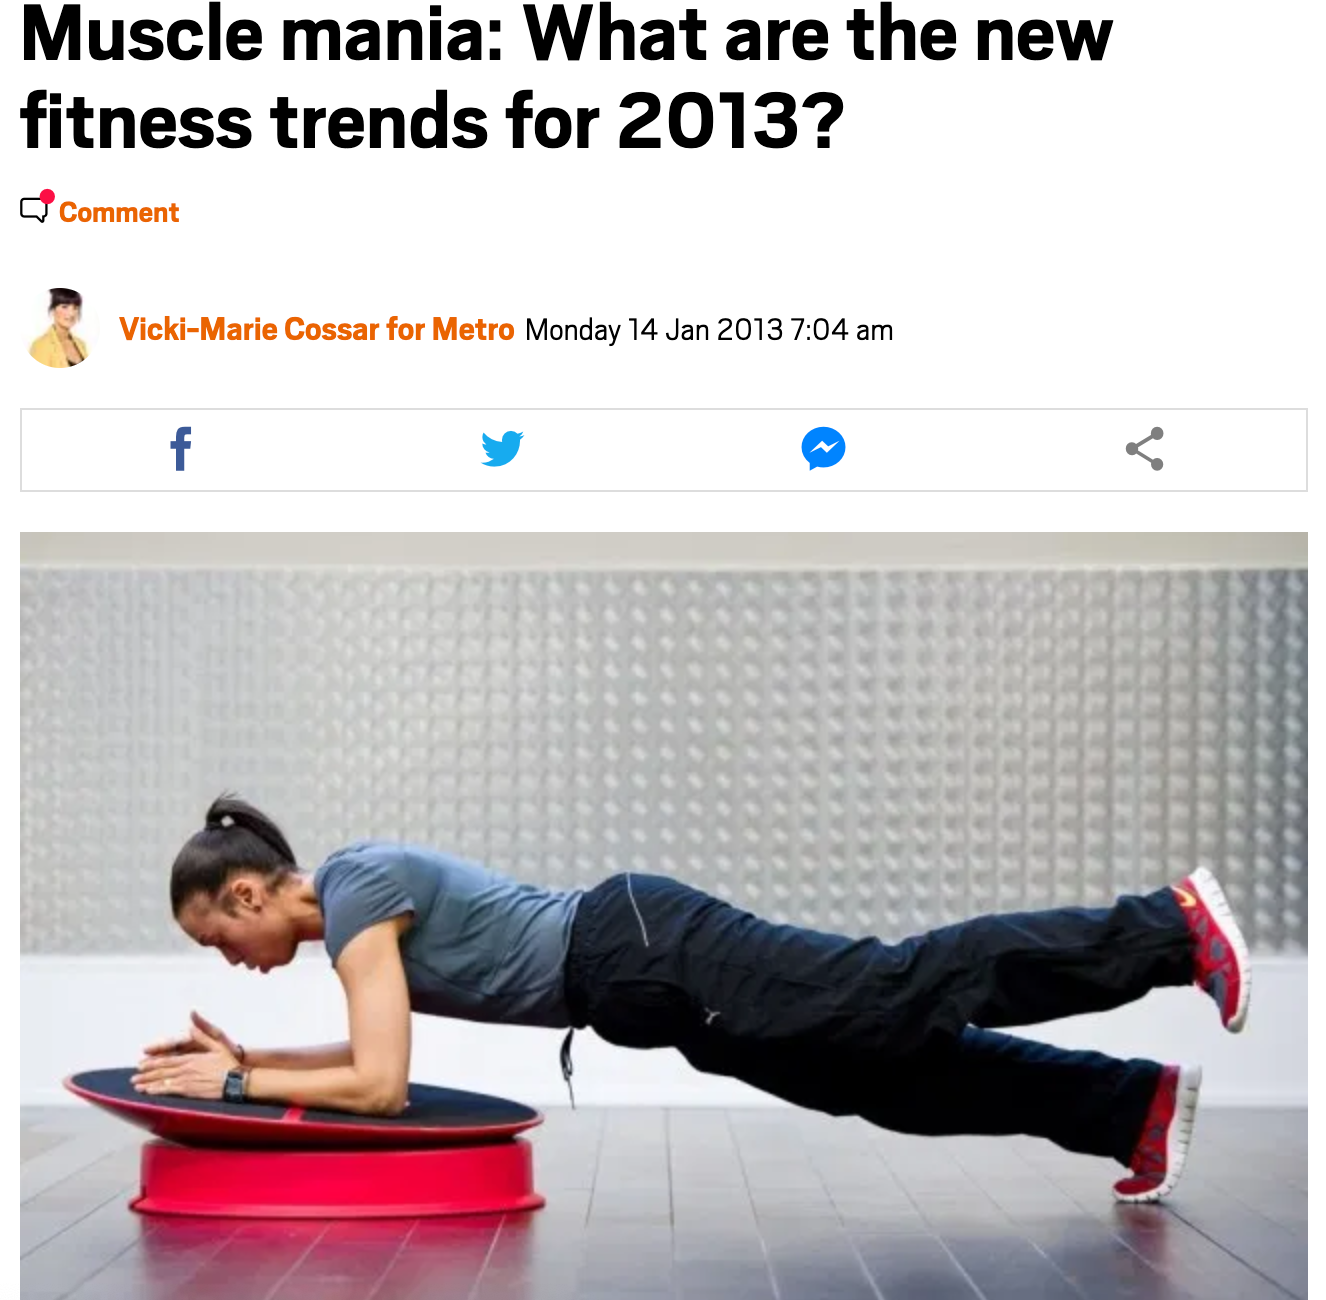 METRO NEWSPAPER UK, JANUARY 14, 2013: Muscle mania: What are the new fitness trends for 2013?